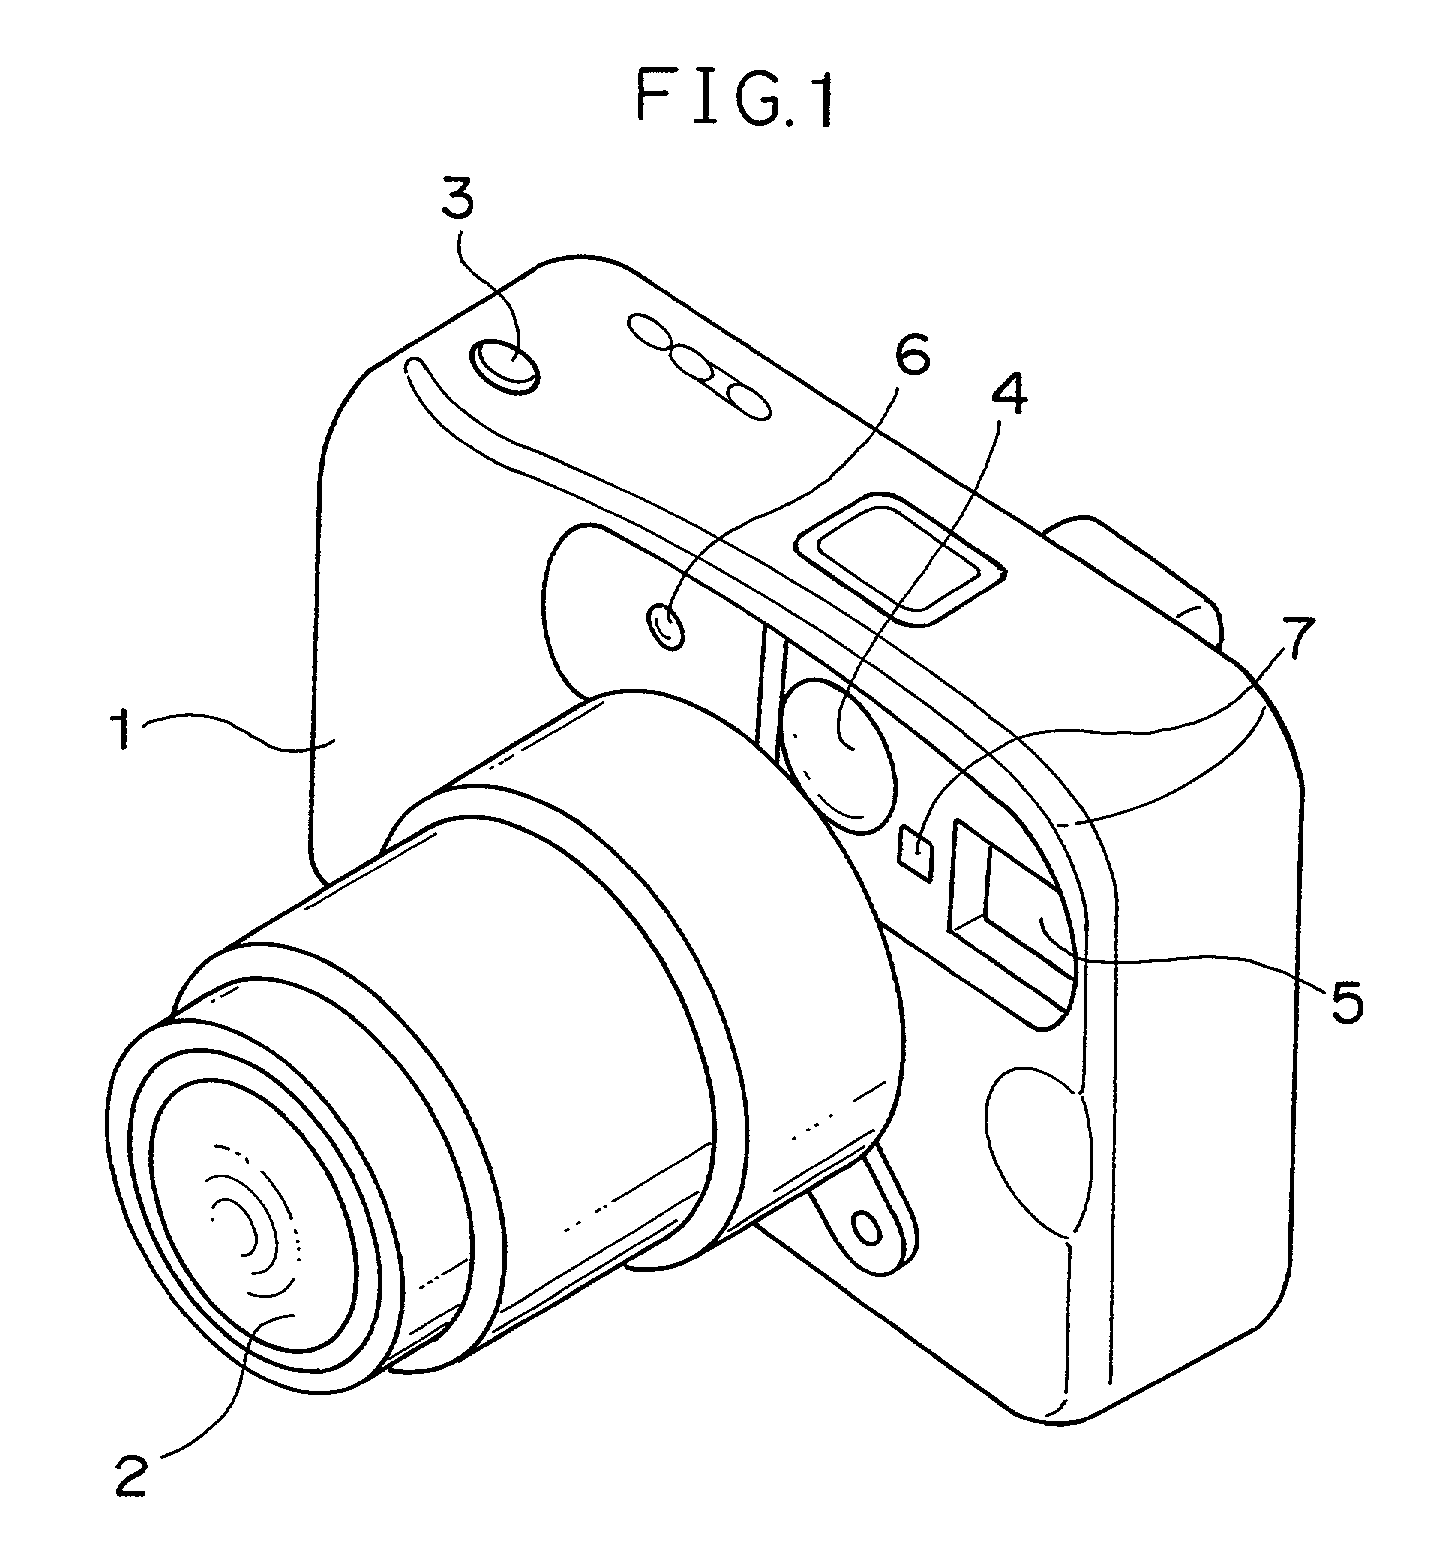 Digital camera and digital processing system for correcting motion blur using spatial frequency